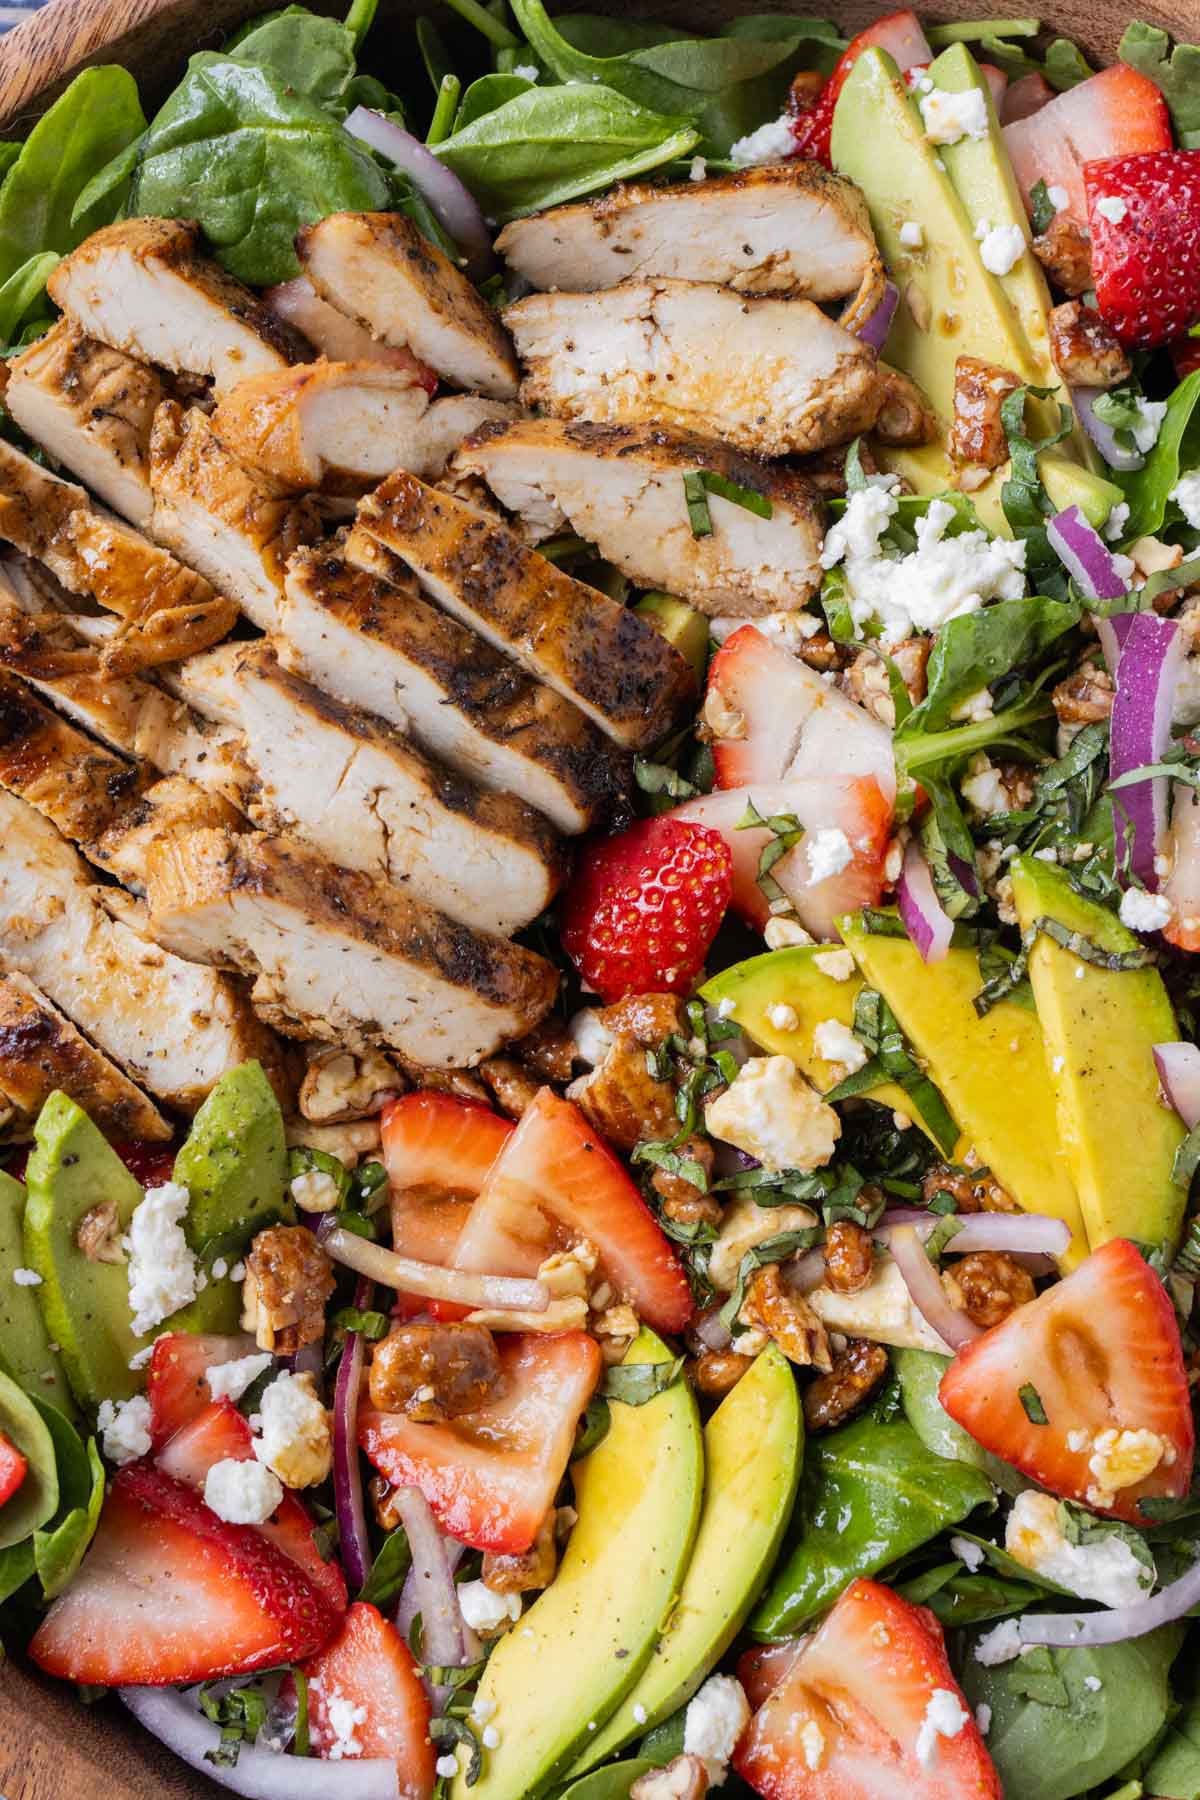 Grilled chicken is added on top of a spinach salad with strawberries and a balsamic vinaigrette.